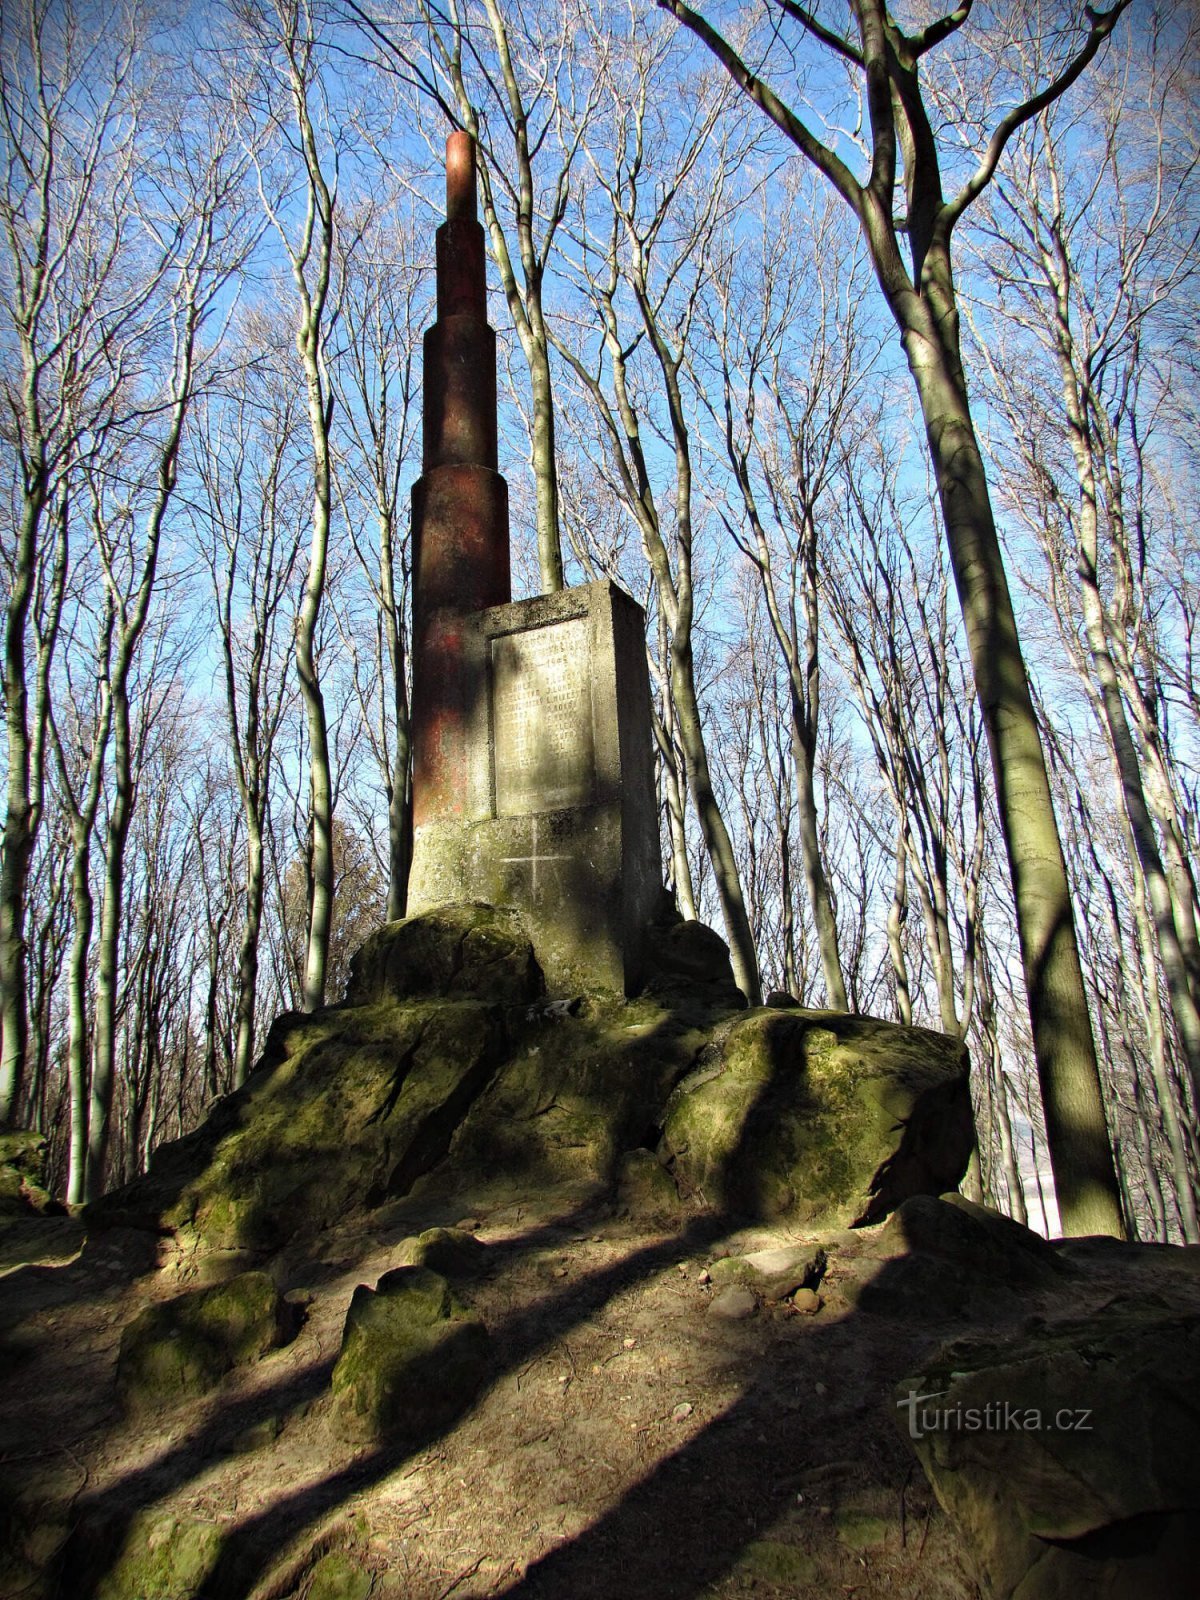 Rýsov - Monument to the fight against fascism